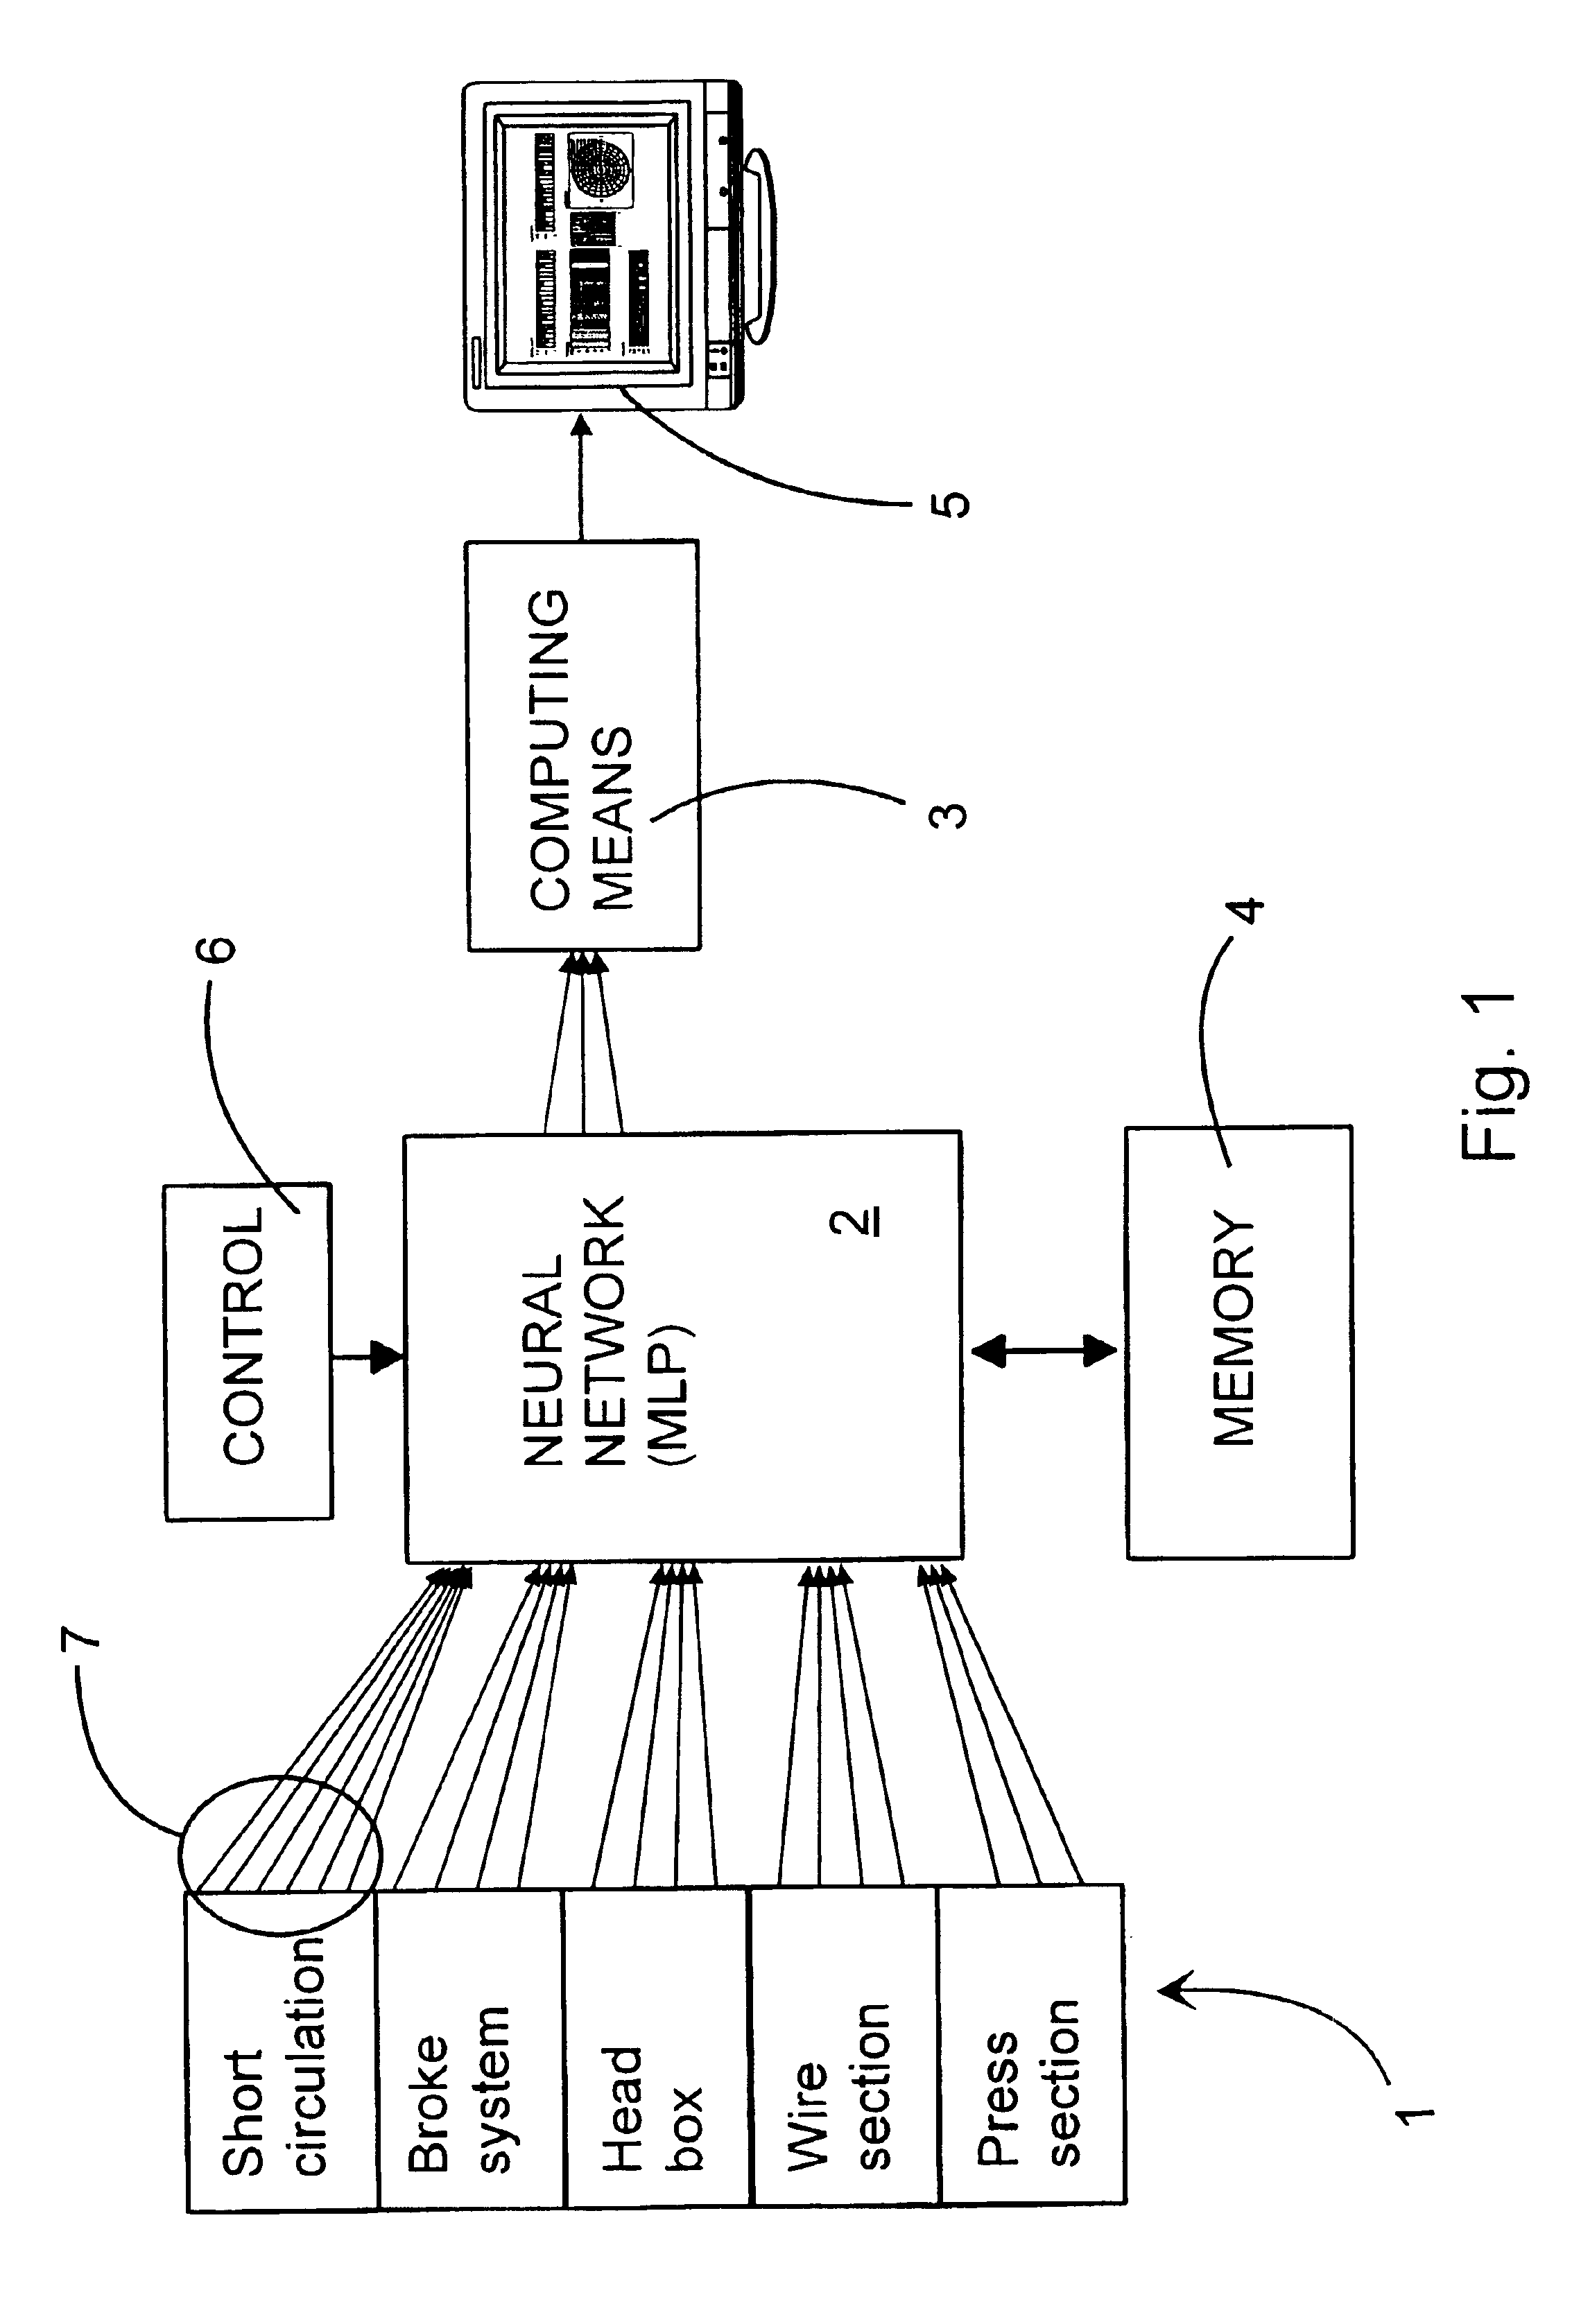 Method and system for monitoring and analyzing a paper manufacturing process